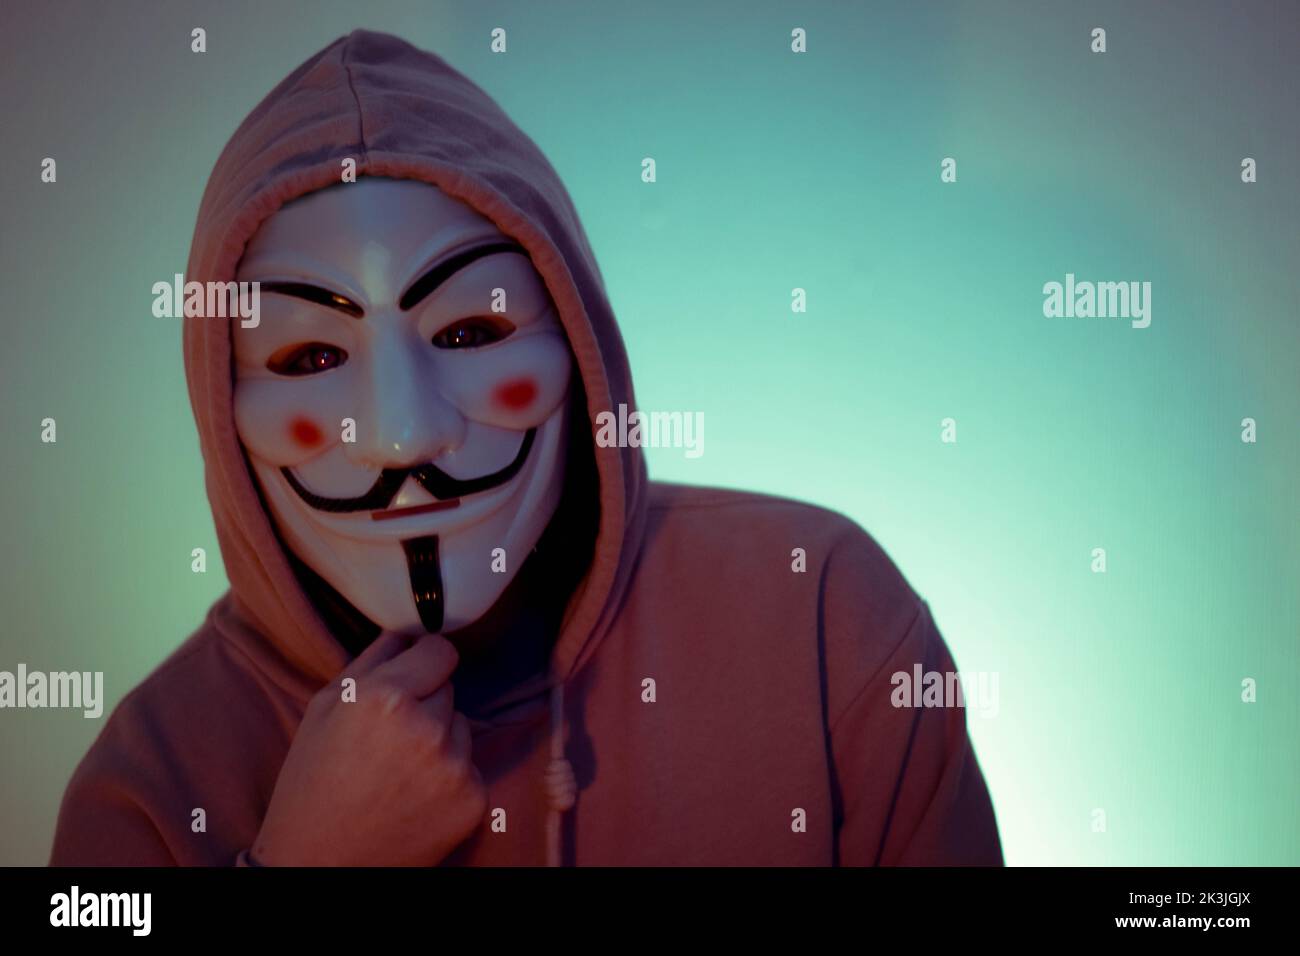 A portrait of a person wearing a hoodie and the Guy Fawkes mask Stock Photo